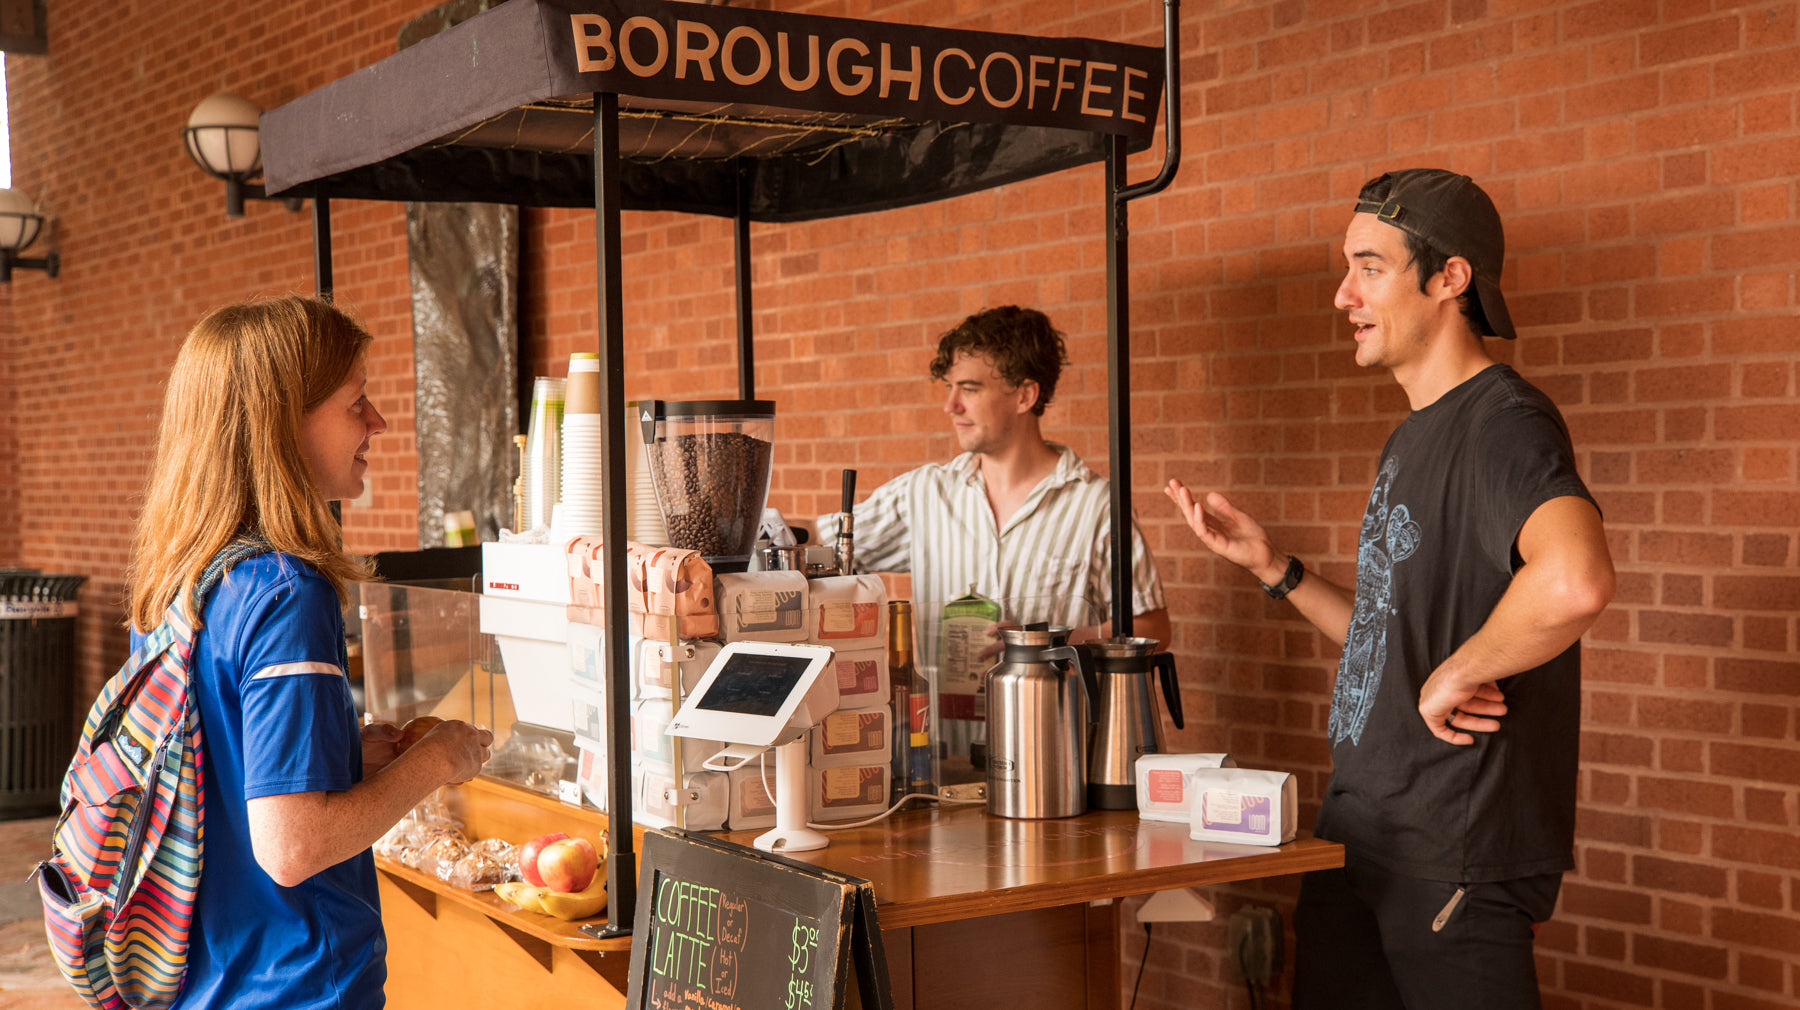 The team at Borough Coffee serving top-notch coffee to their guests at the Weatherspoon Art Museum location on the campus at UNCG.